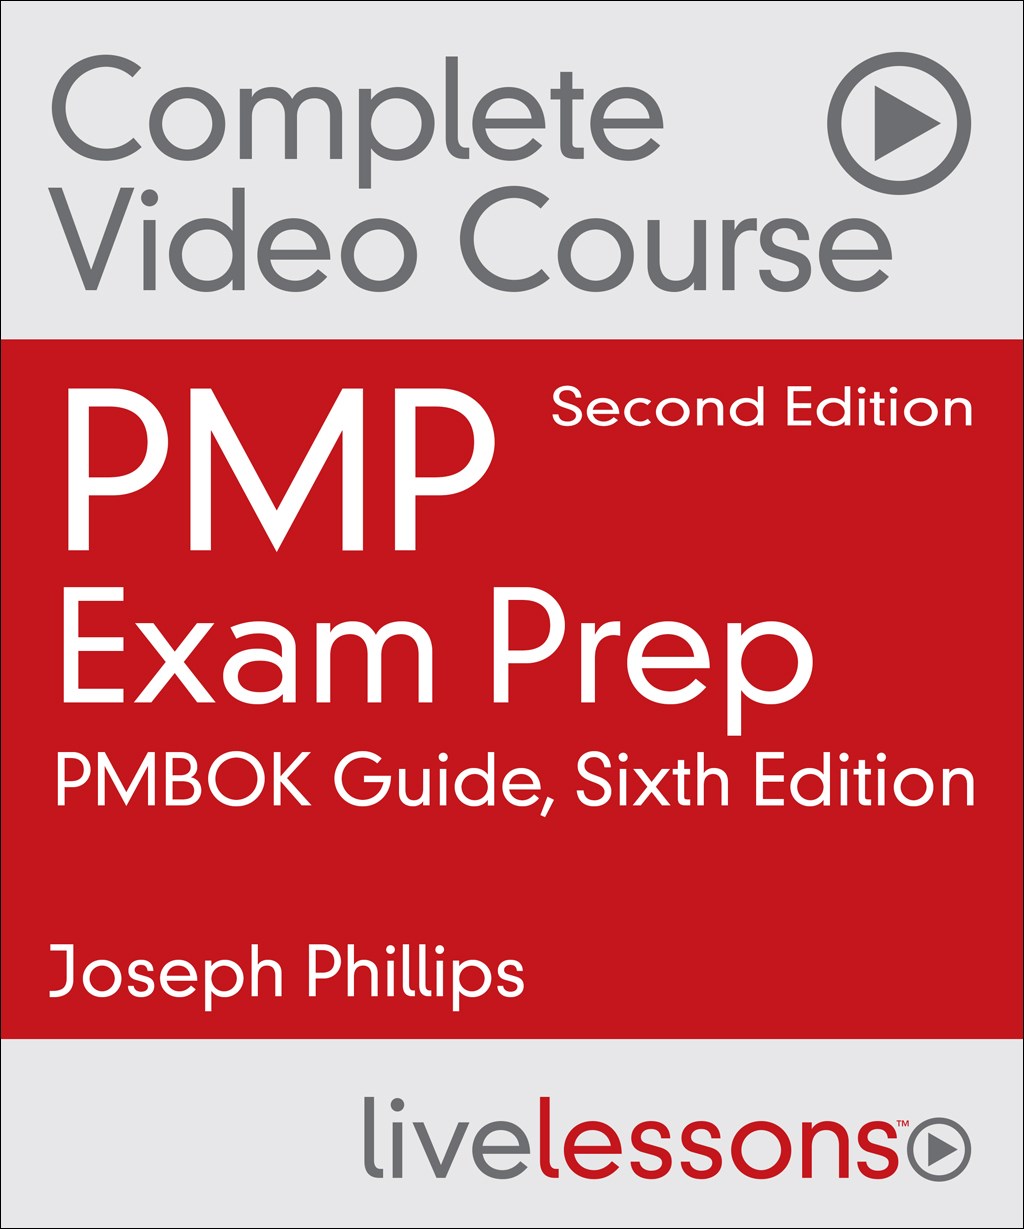 PMP Exam Prep Complete Video Course and Practice Test: PMBOK Guide, Sixth Edition